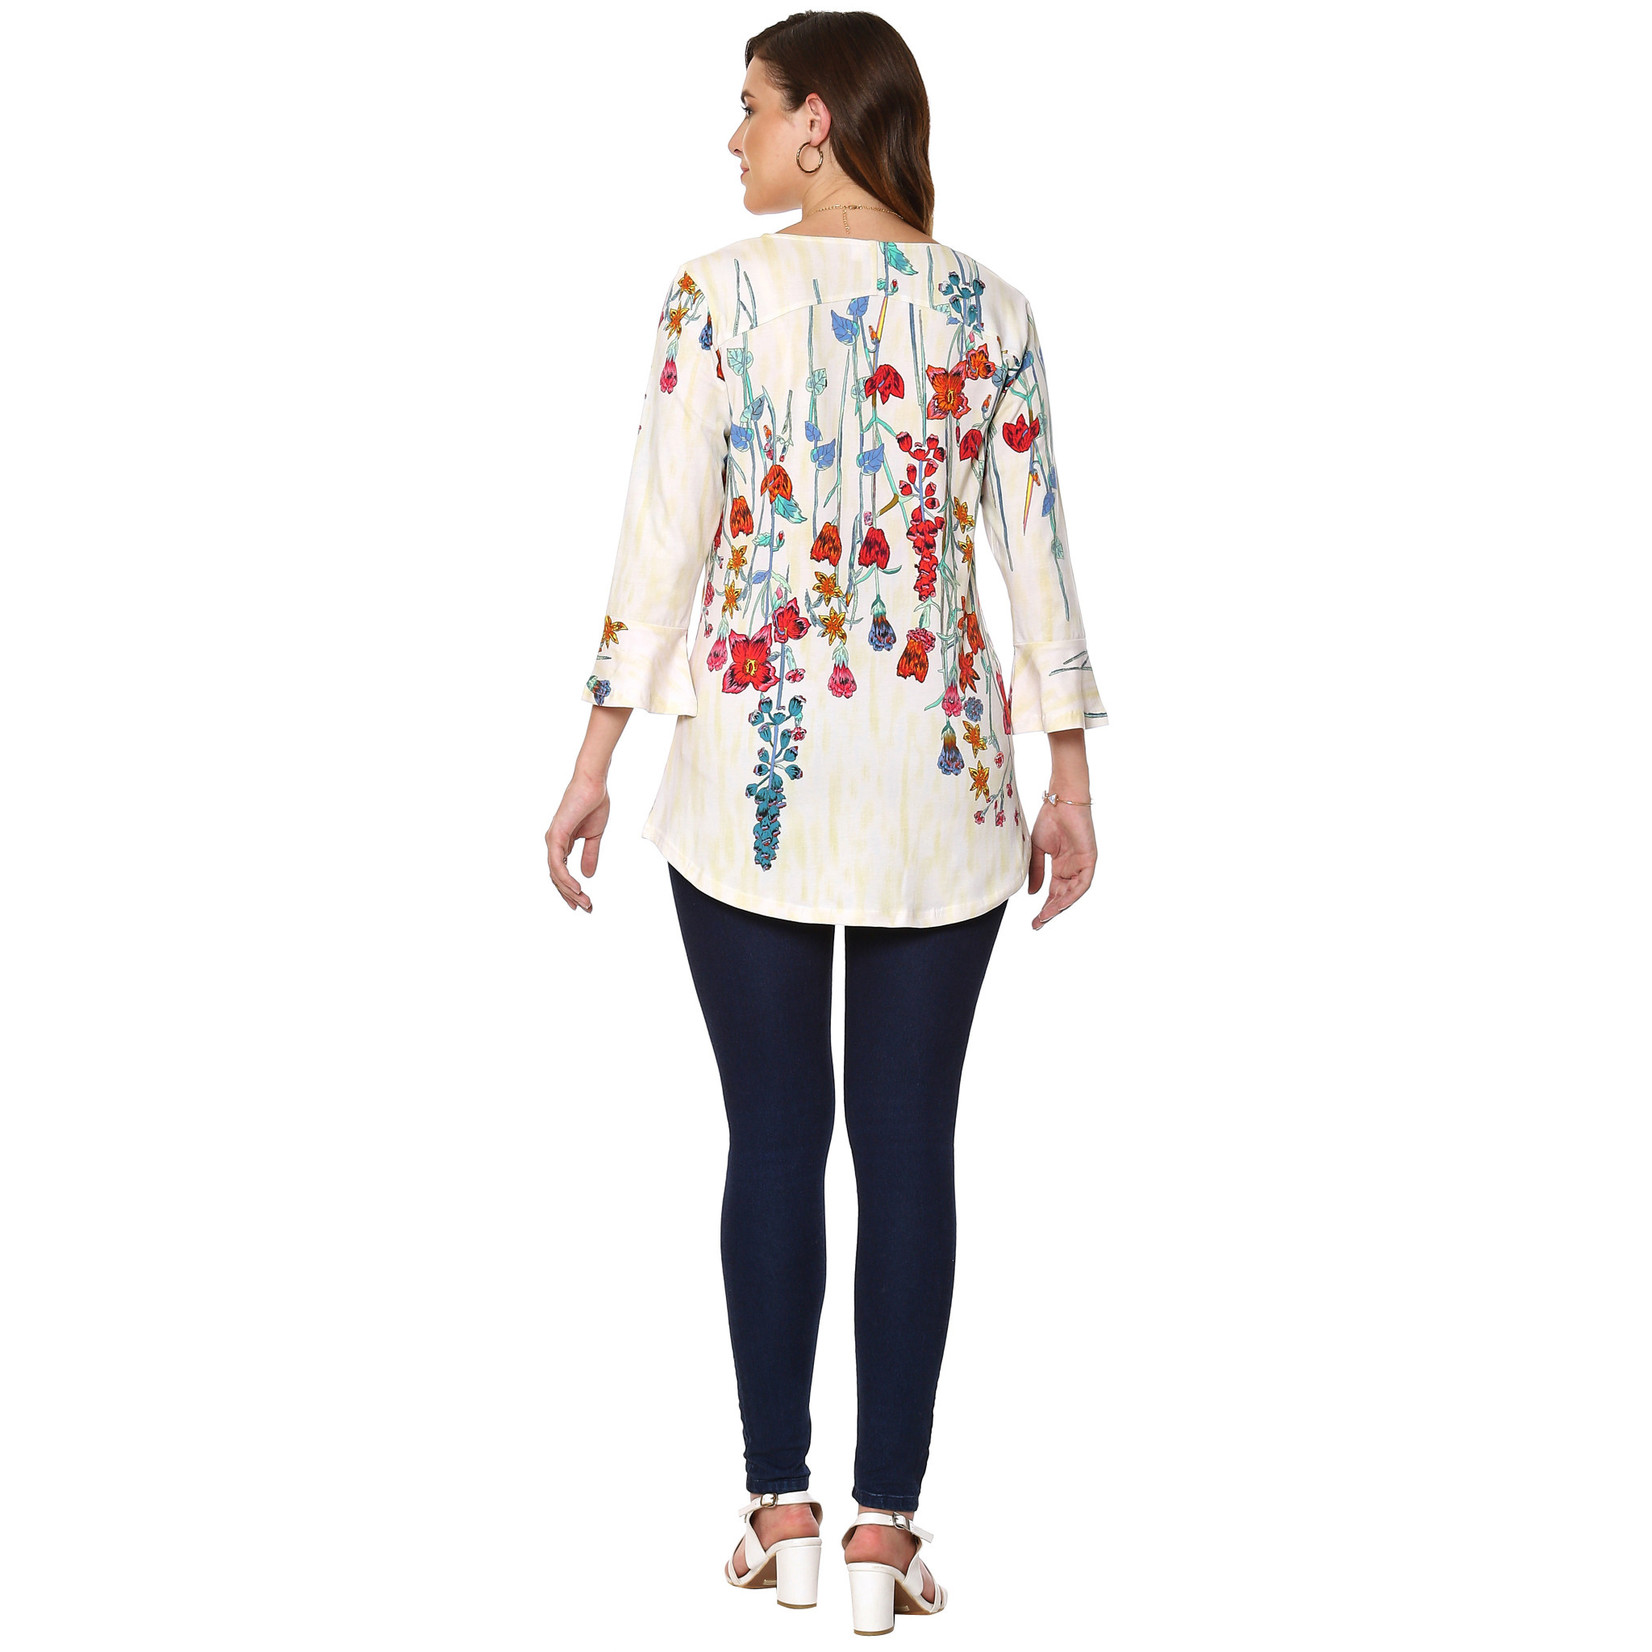 Parsley and Sage Grace Floral 3/4 Bell Slv Tunic in White